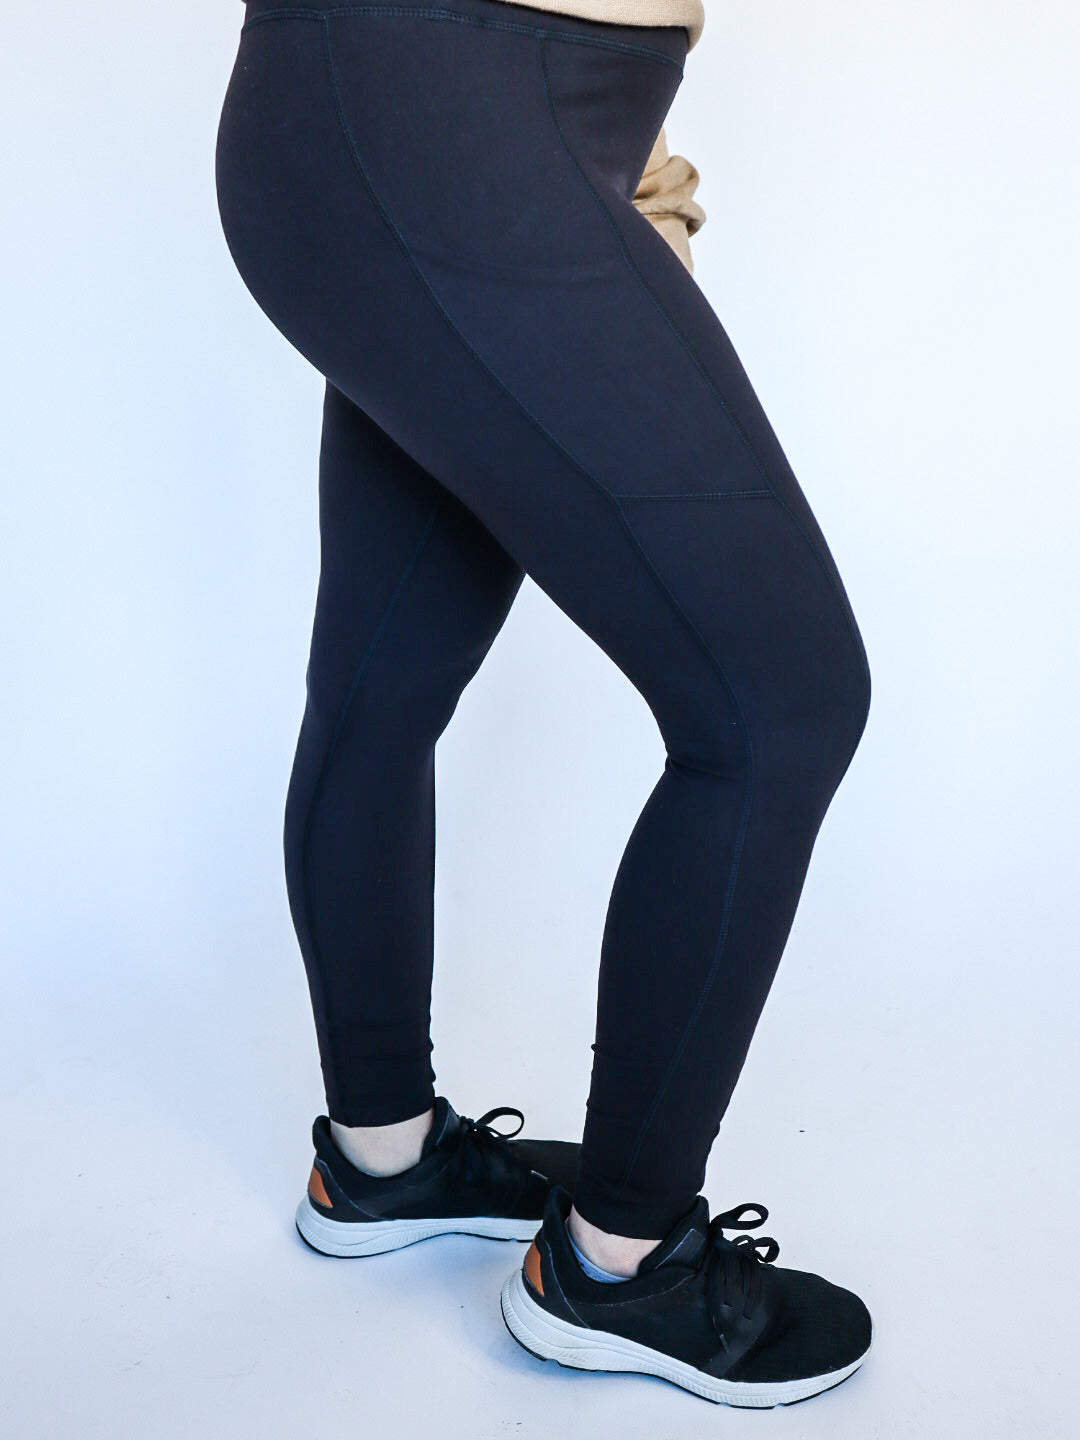 HIGH WAISTED BUTTER SOFT LEGGINGS WITH POCKETS - FINAL SALE